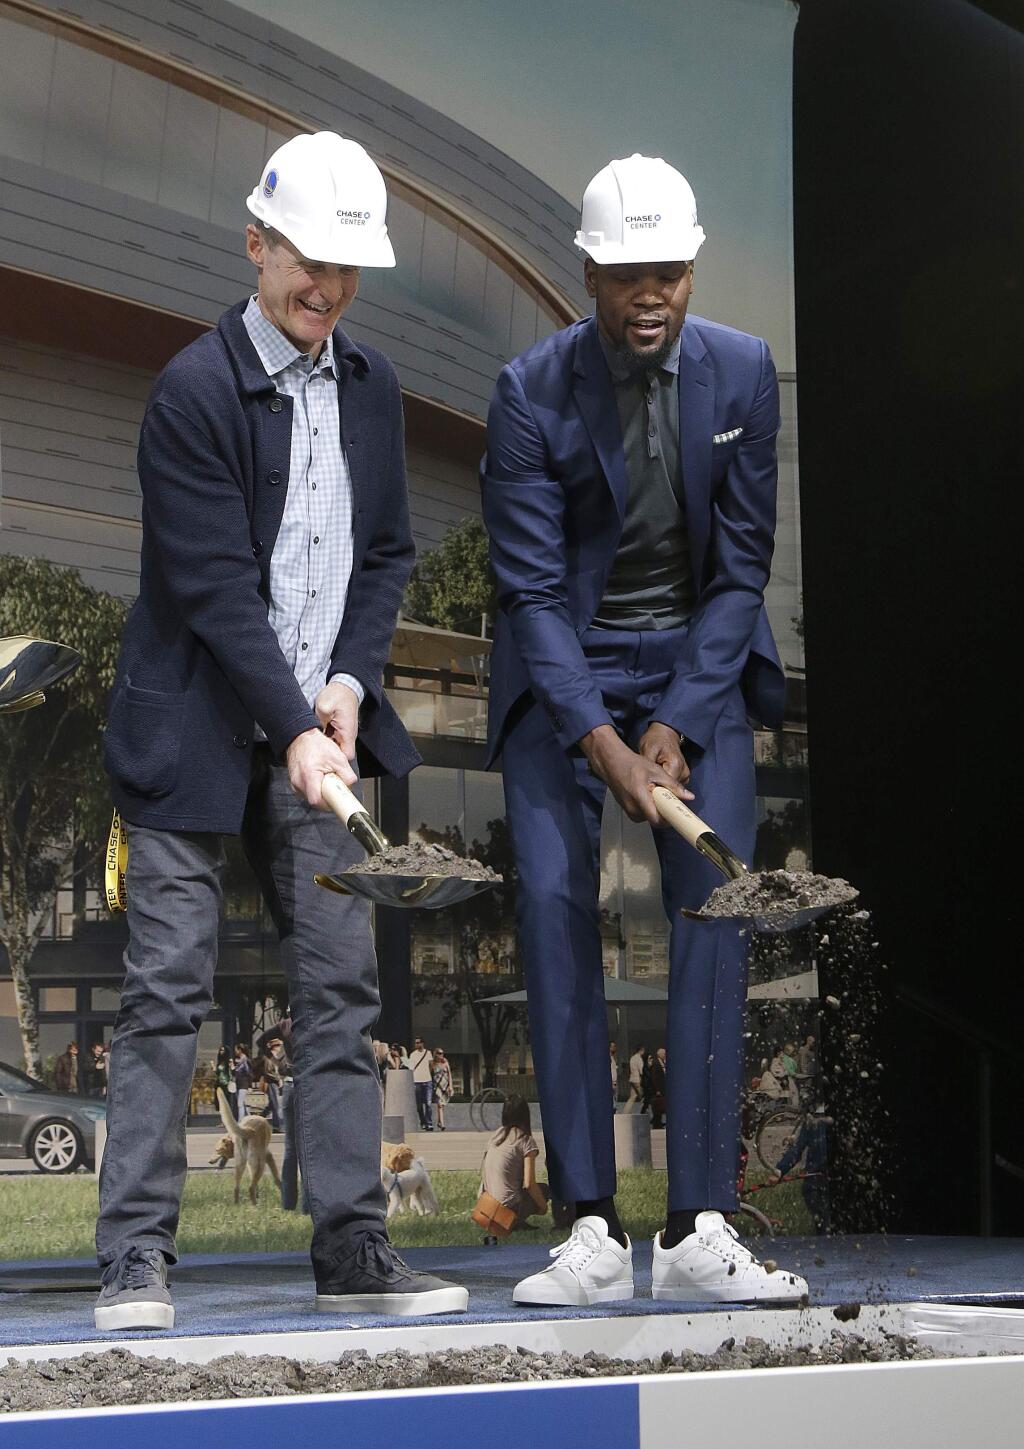 Golden State Warriors head coach Steve Kerr, left, and forward Kevin Durant shovel dirt while posing for photos during a ground breaking ceremony for the Chase Center in San Francisco, Tuesday, Jan. 17, 2017. (AP Photo/Jeff Chiu)